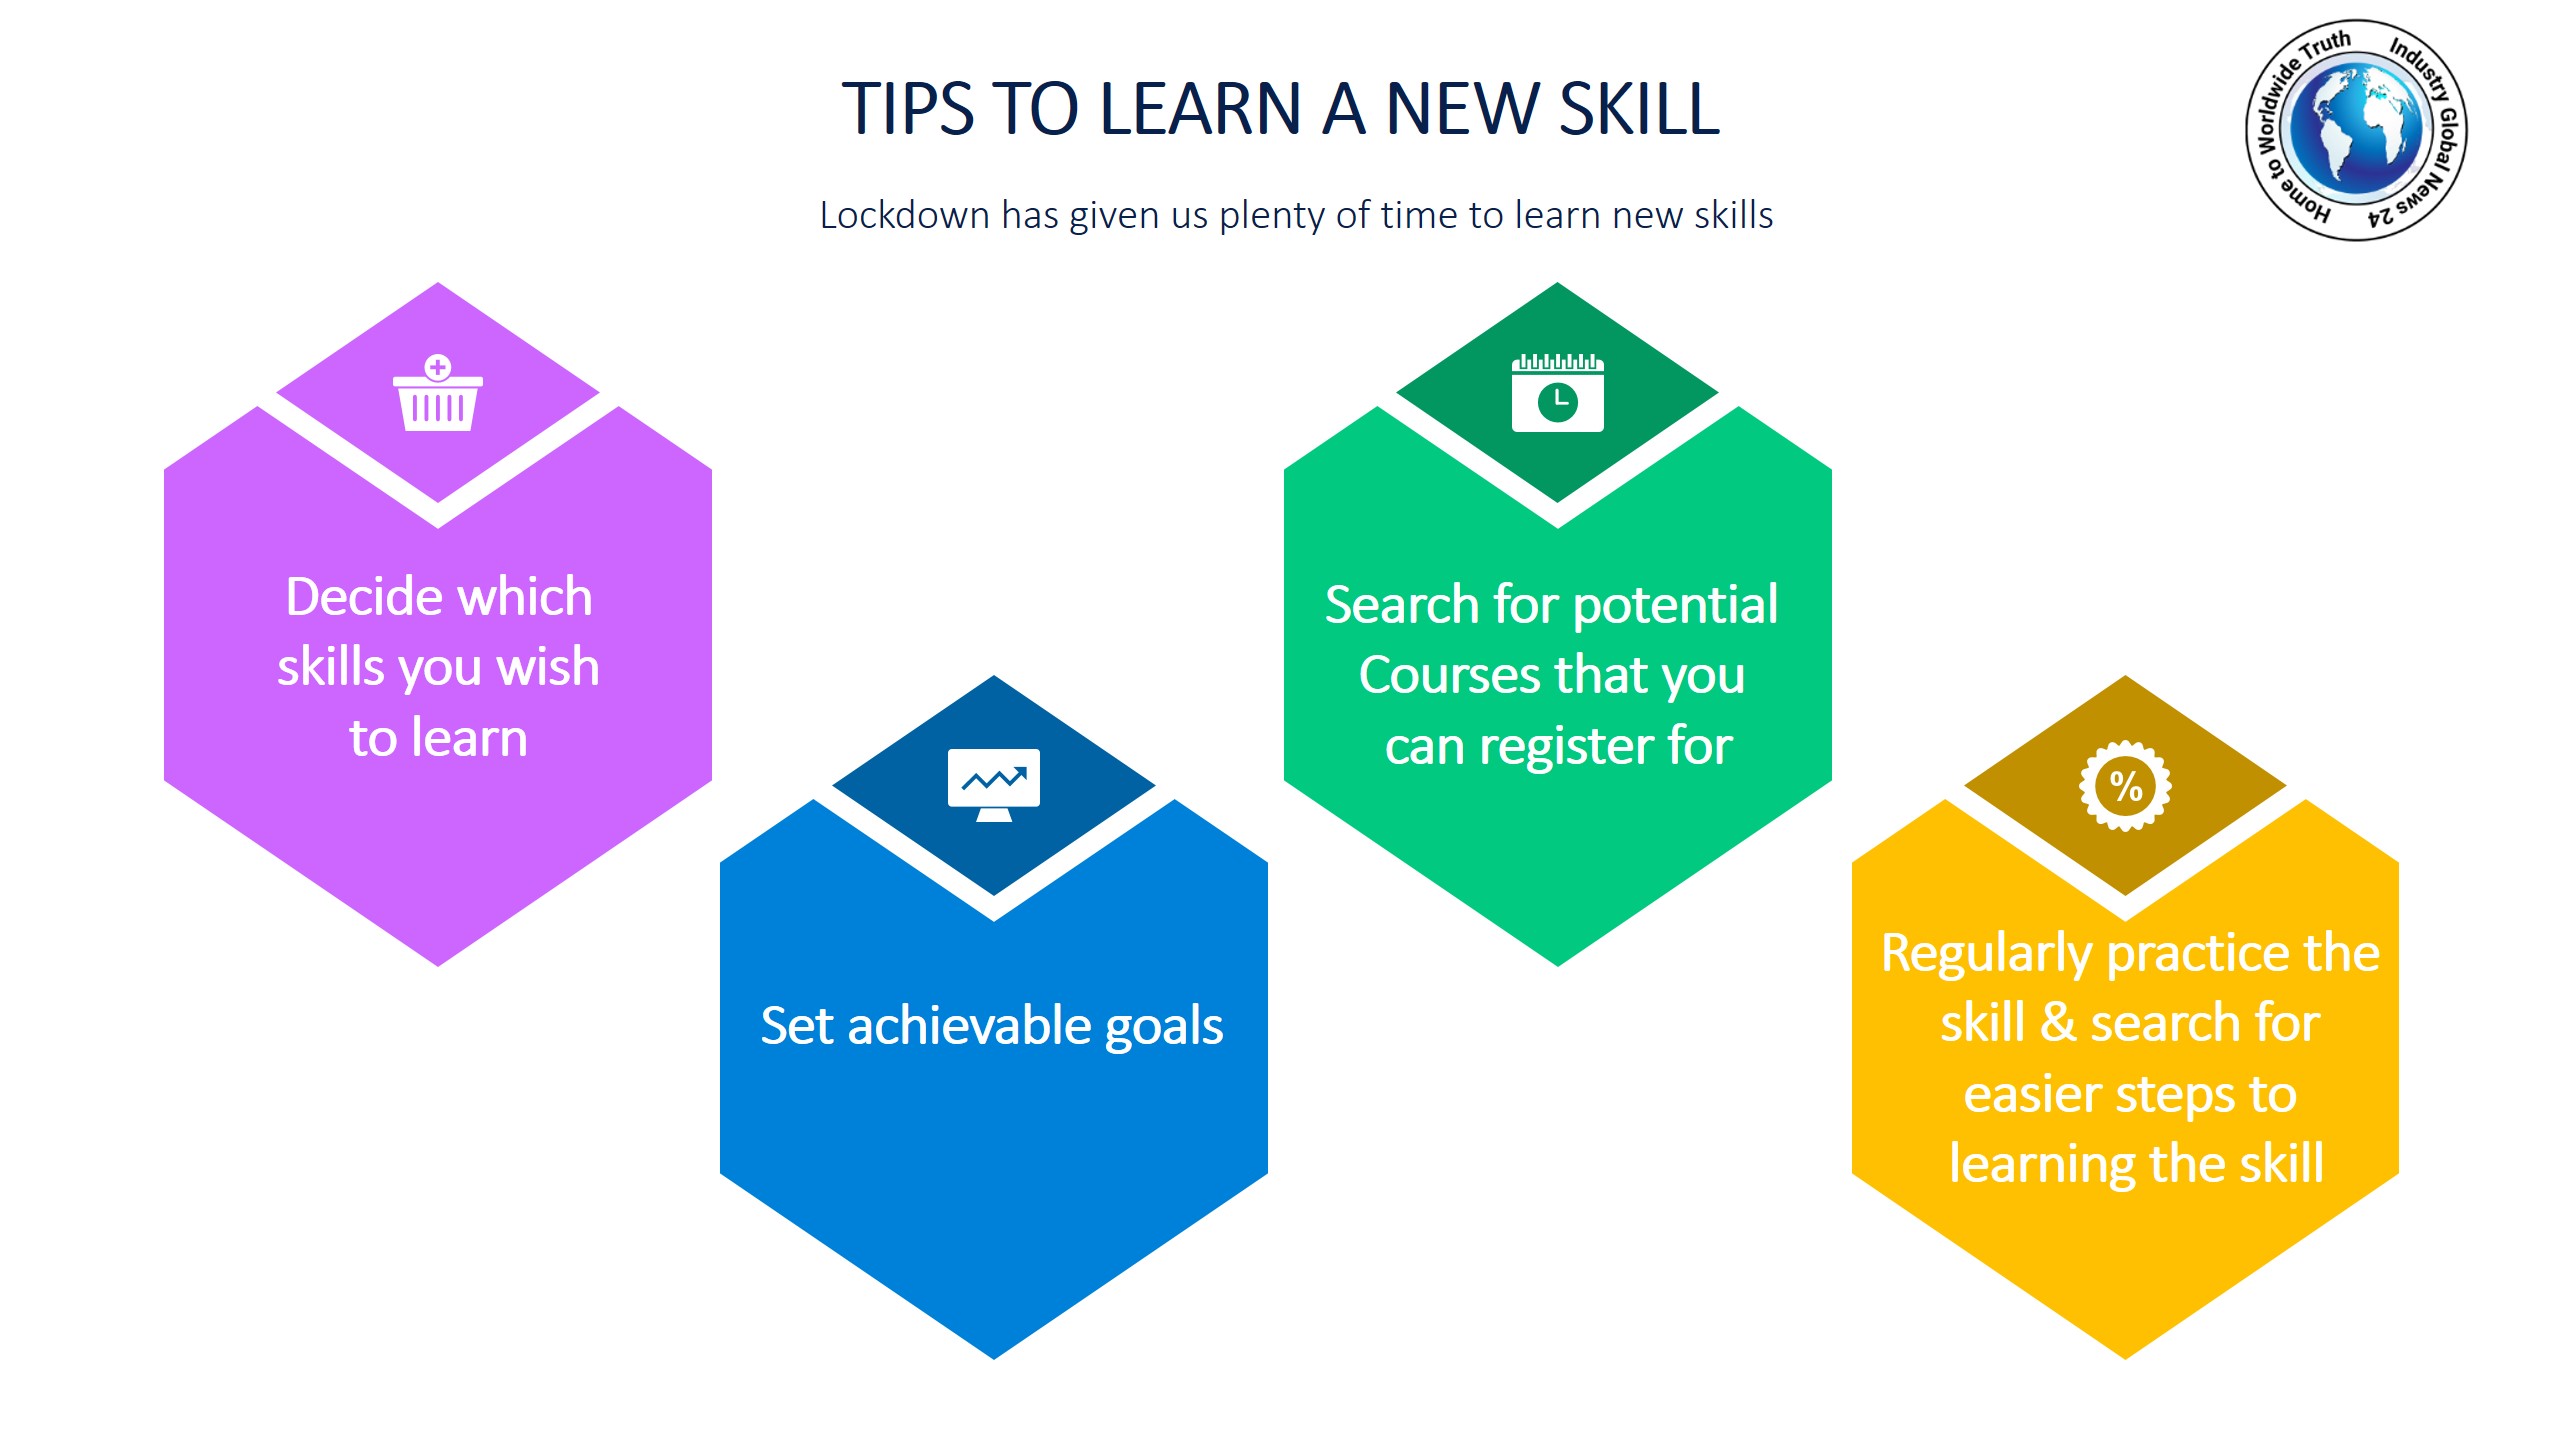 Tips to learn a new skill